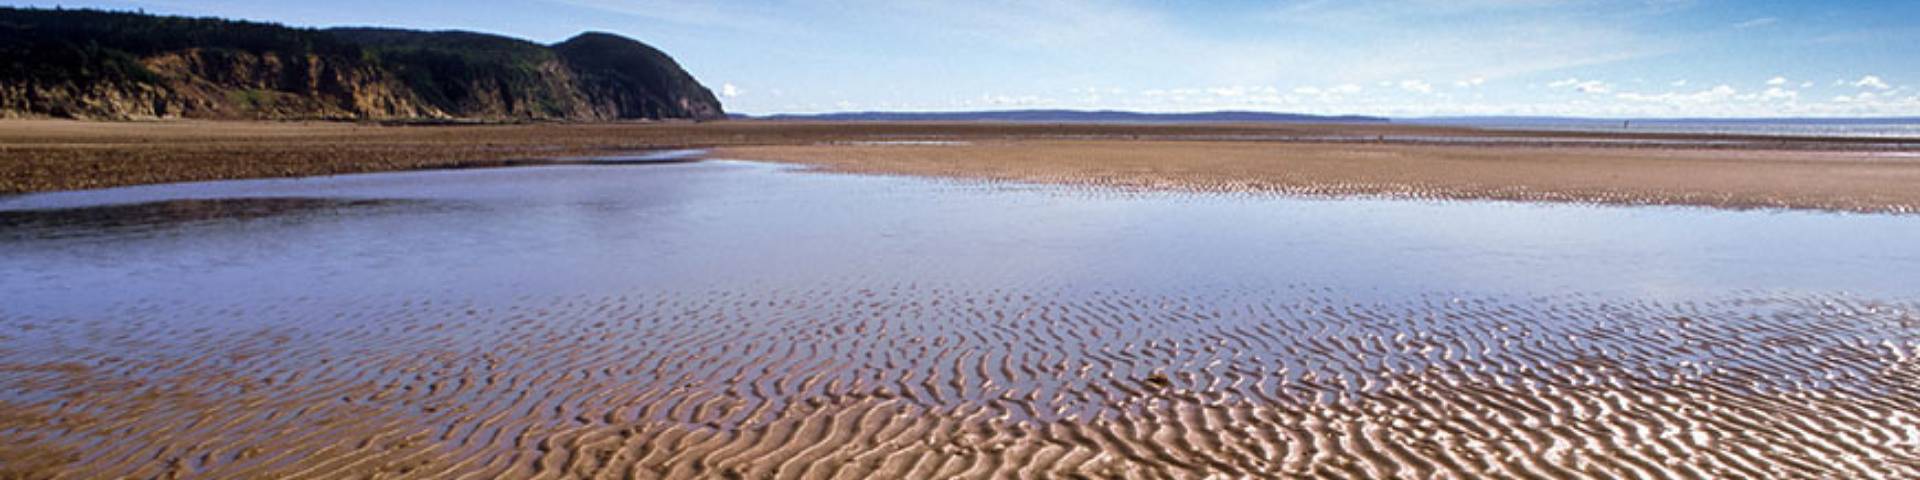 A view of a beach at low tide with the ocean recessed far away